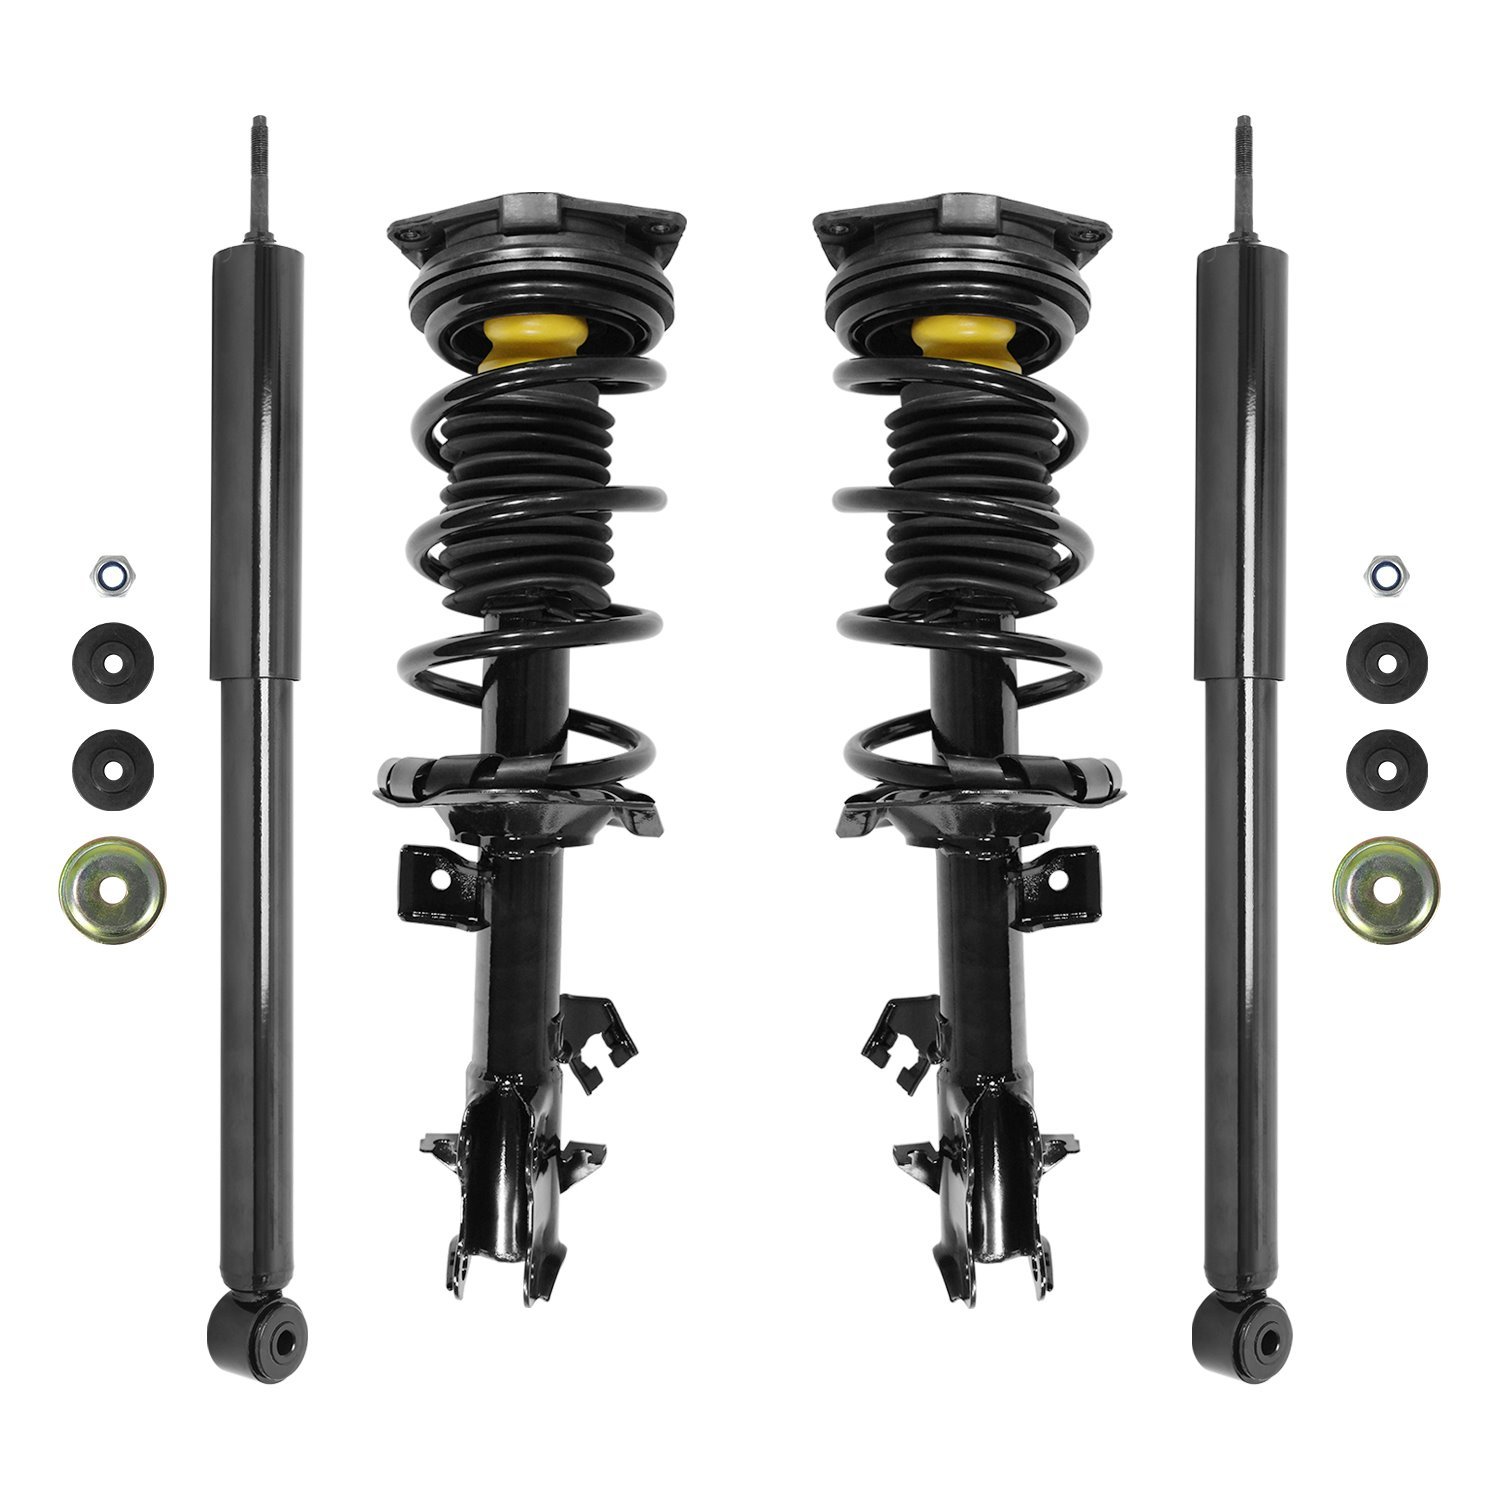 4-11353-255070-001 Front & Rear Suspension Strut & Coil Spring Assembly Fits Select Nissan Cube